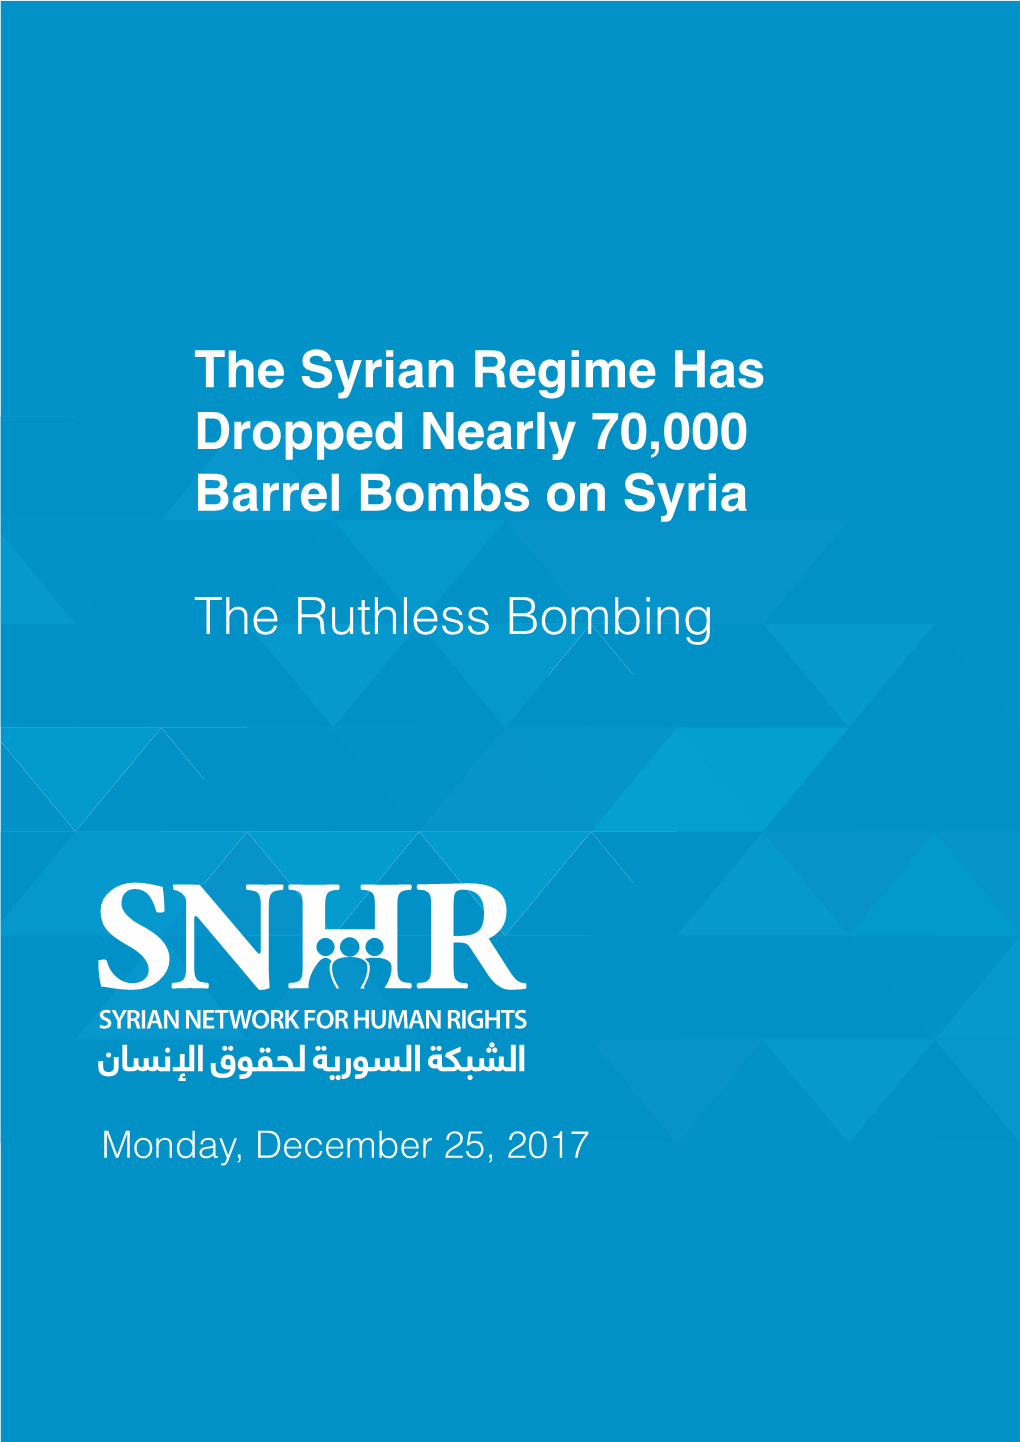 The Syrian Regime Has Dropped Nearly 70,000 Barrel Bombs on Syria the Ruthless Bombing